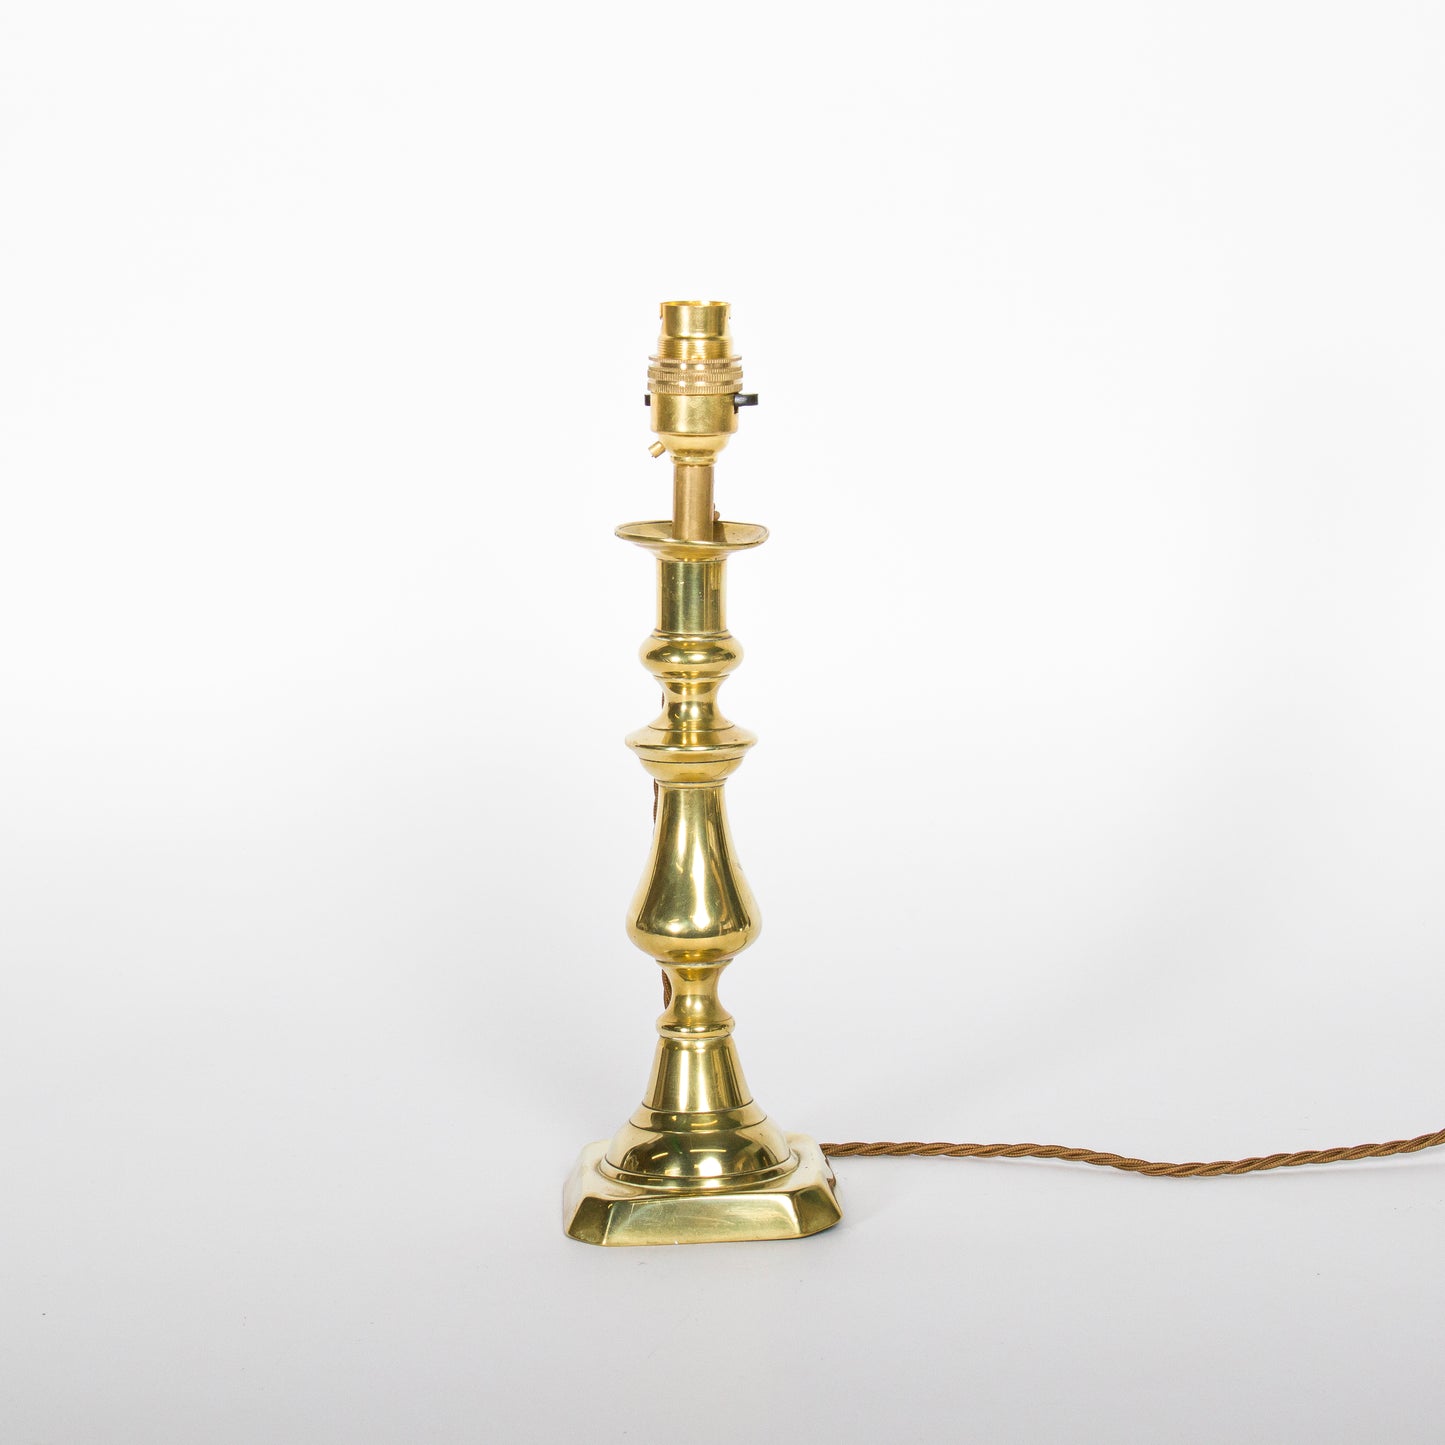 A pair of brass candlesticks converted to lamps, circa 1850